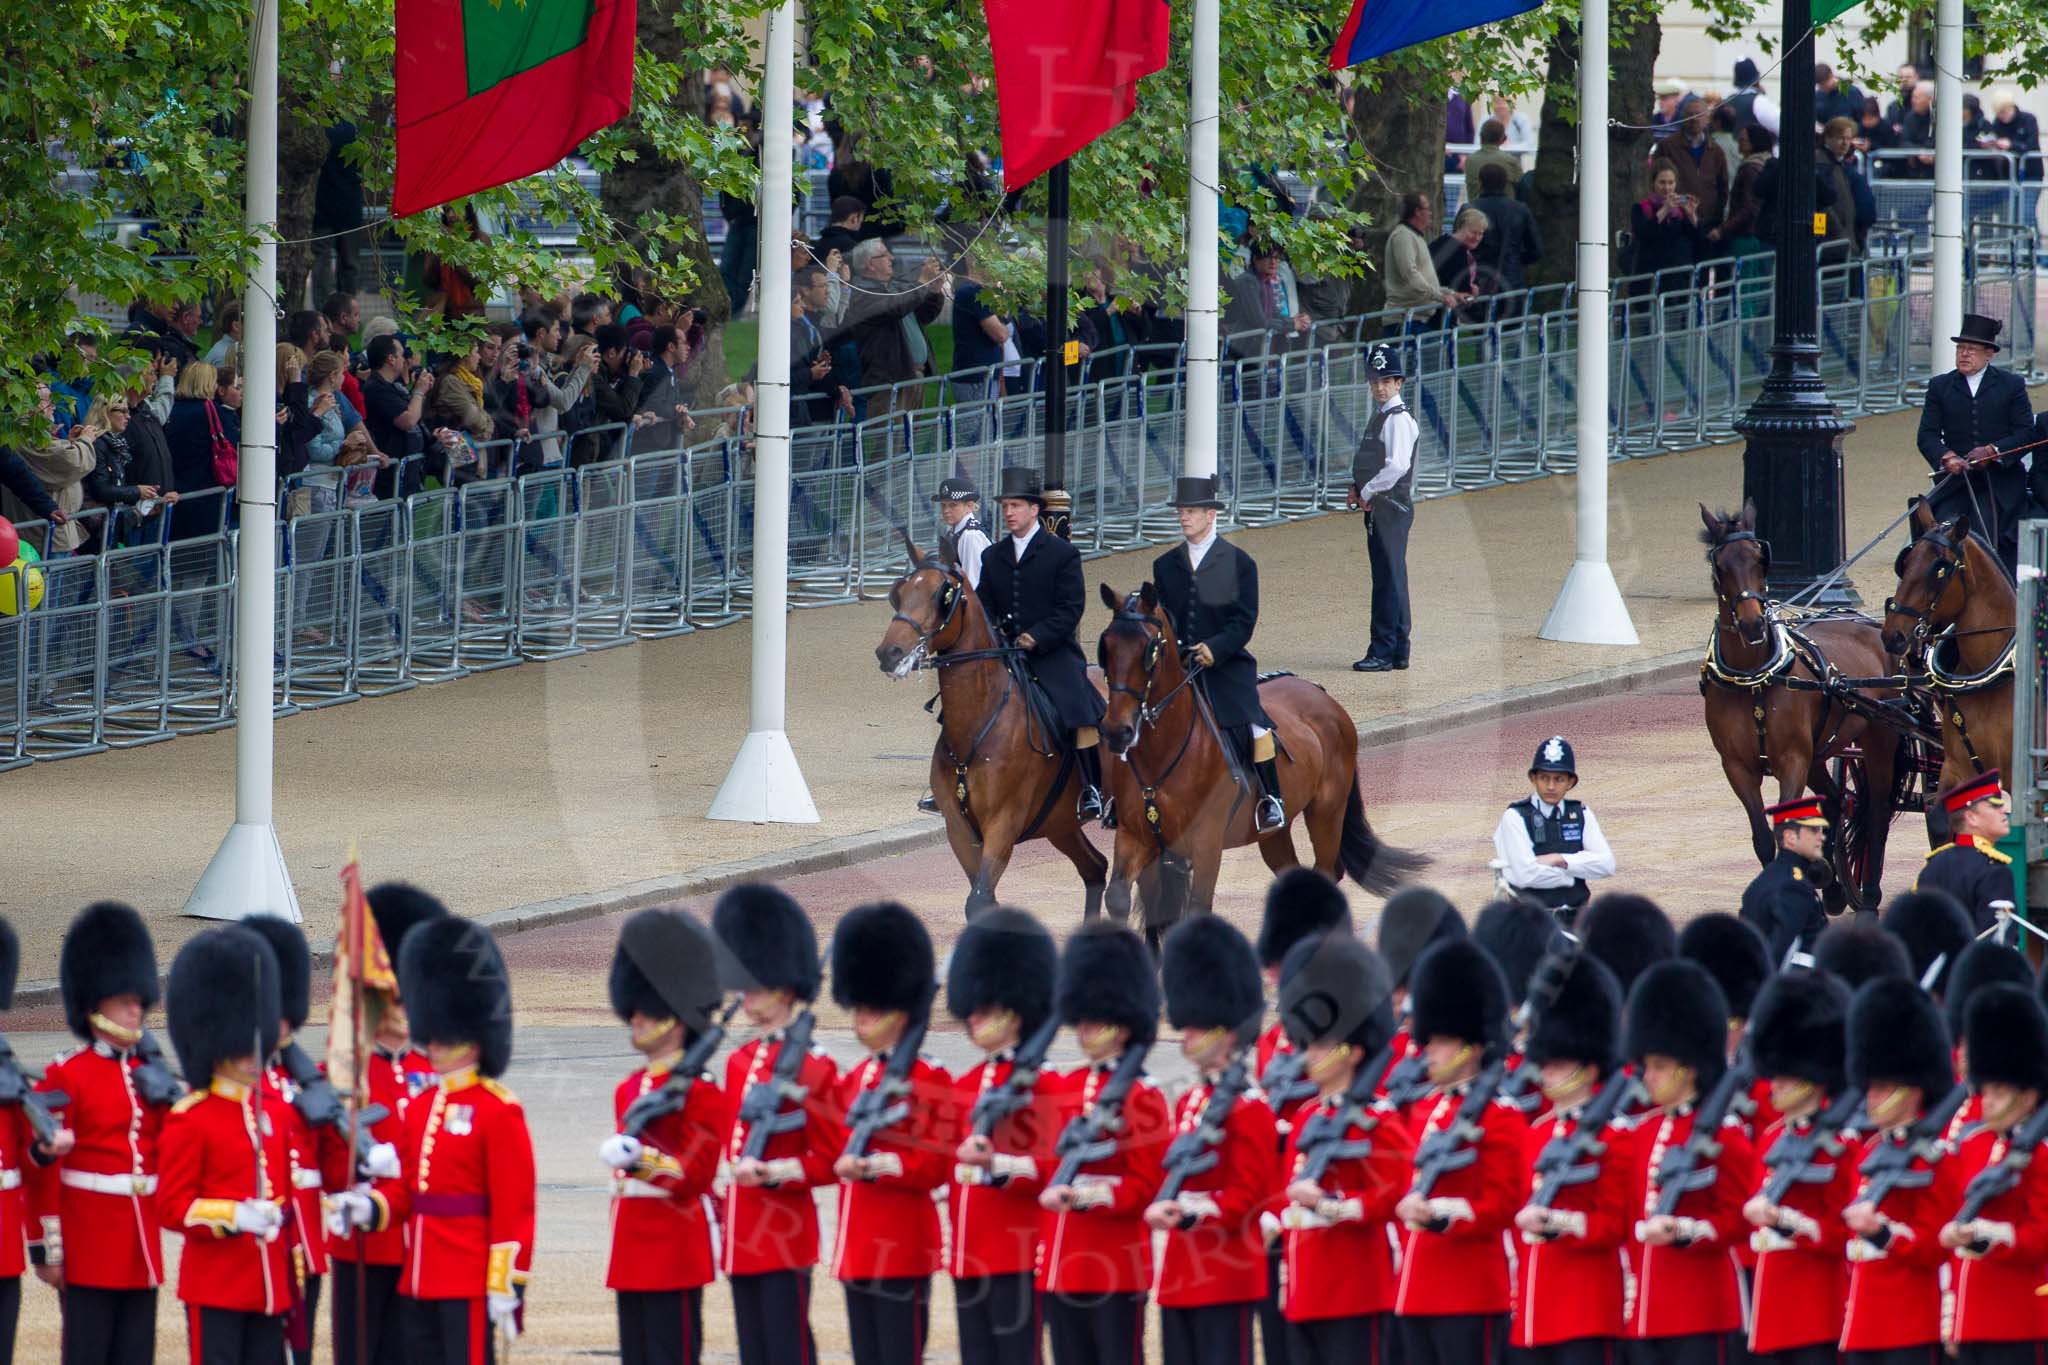 Major General's Review 2013: Two grooms are leading the line of carriages that will carry members of the Royal Family across Horse Guards Parade..
Horse Guards Parade, Westminster,
London SW1,

United Kingdom,
on 01 June 2013 at 10:50, image #196